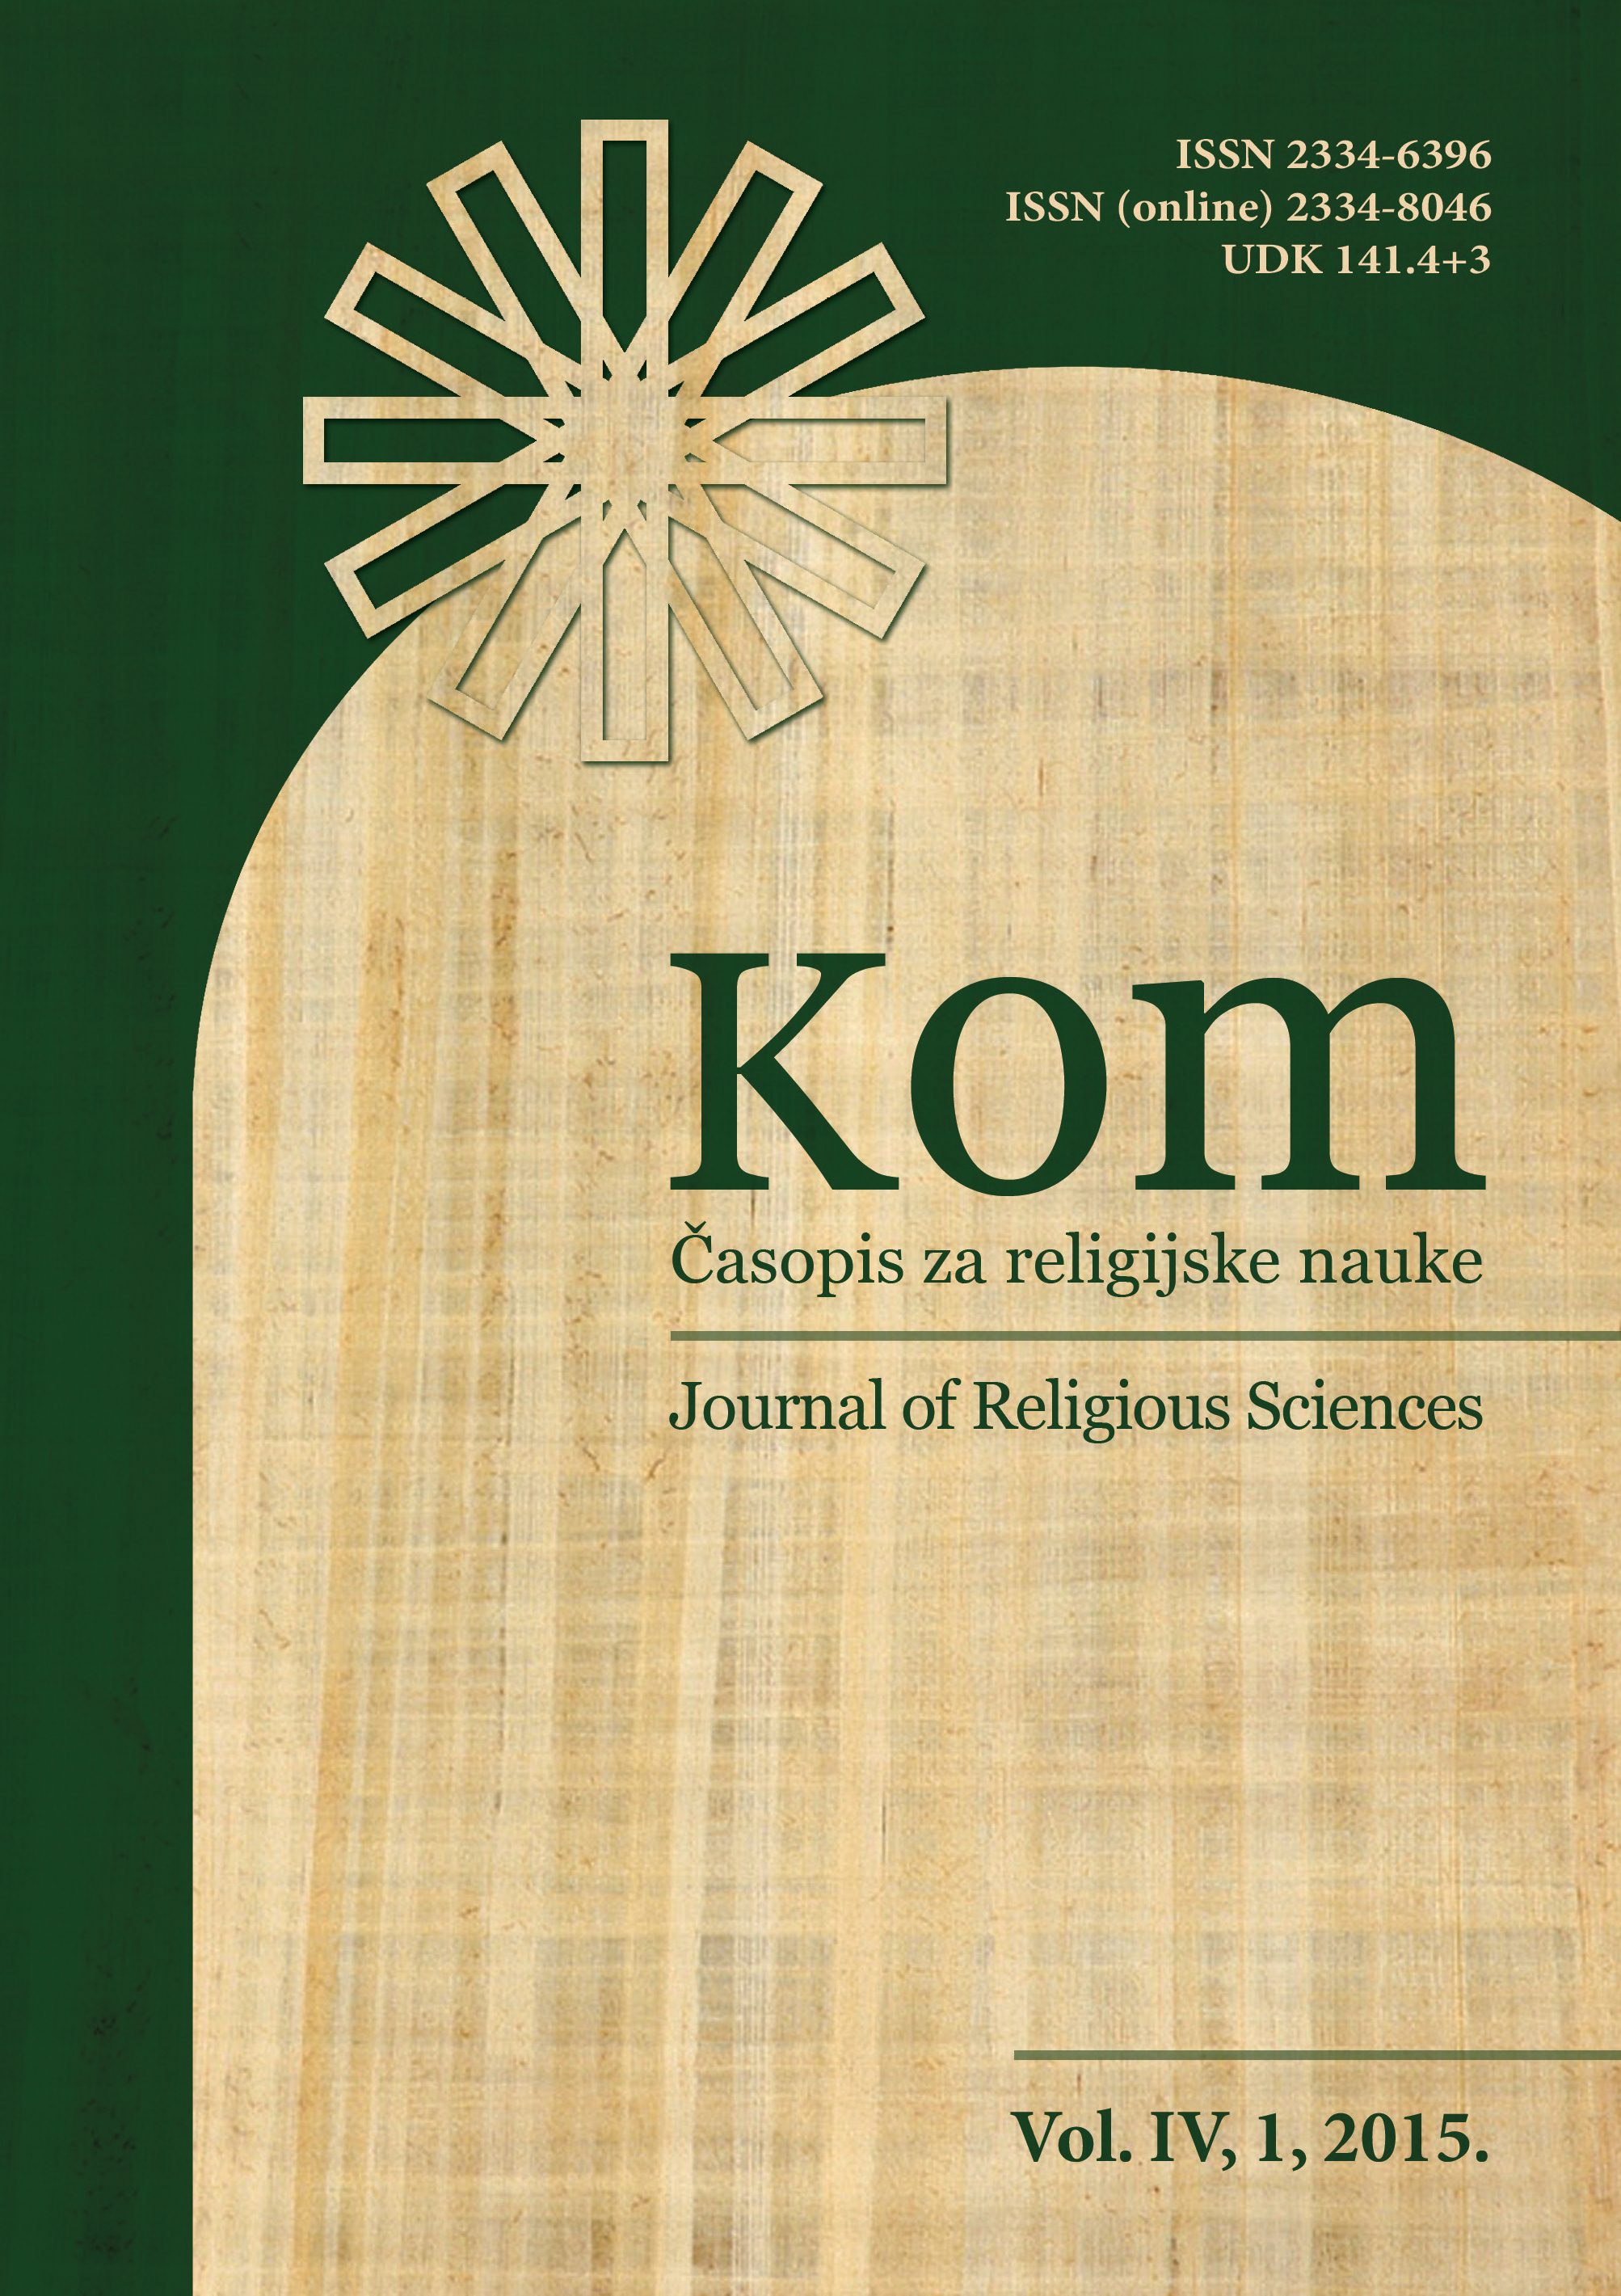 Human Nature in Orthodox Tradition with Reference to Irfan Tradition in Islam Cover Image